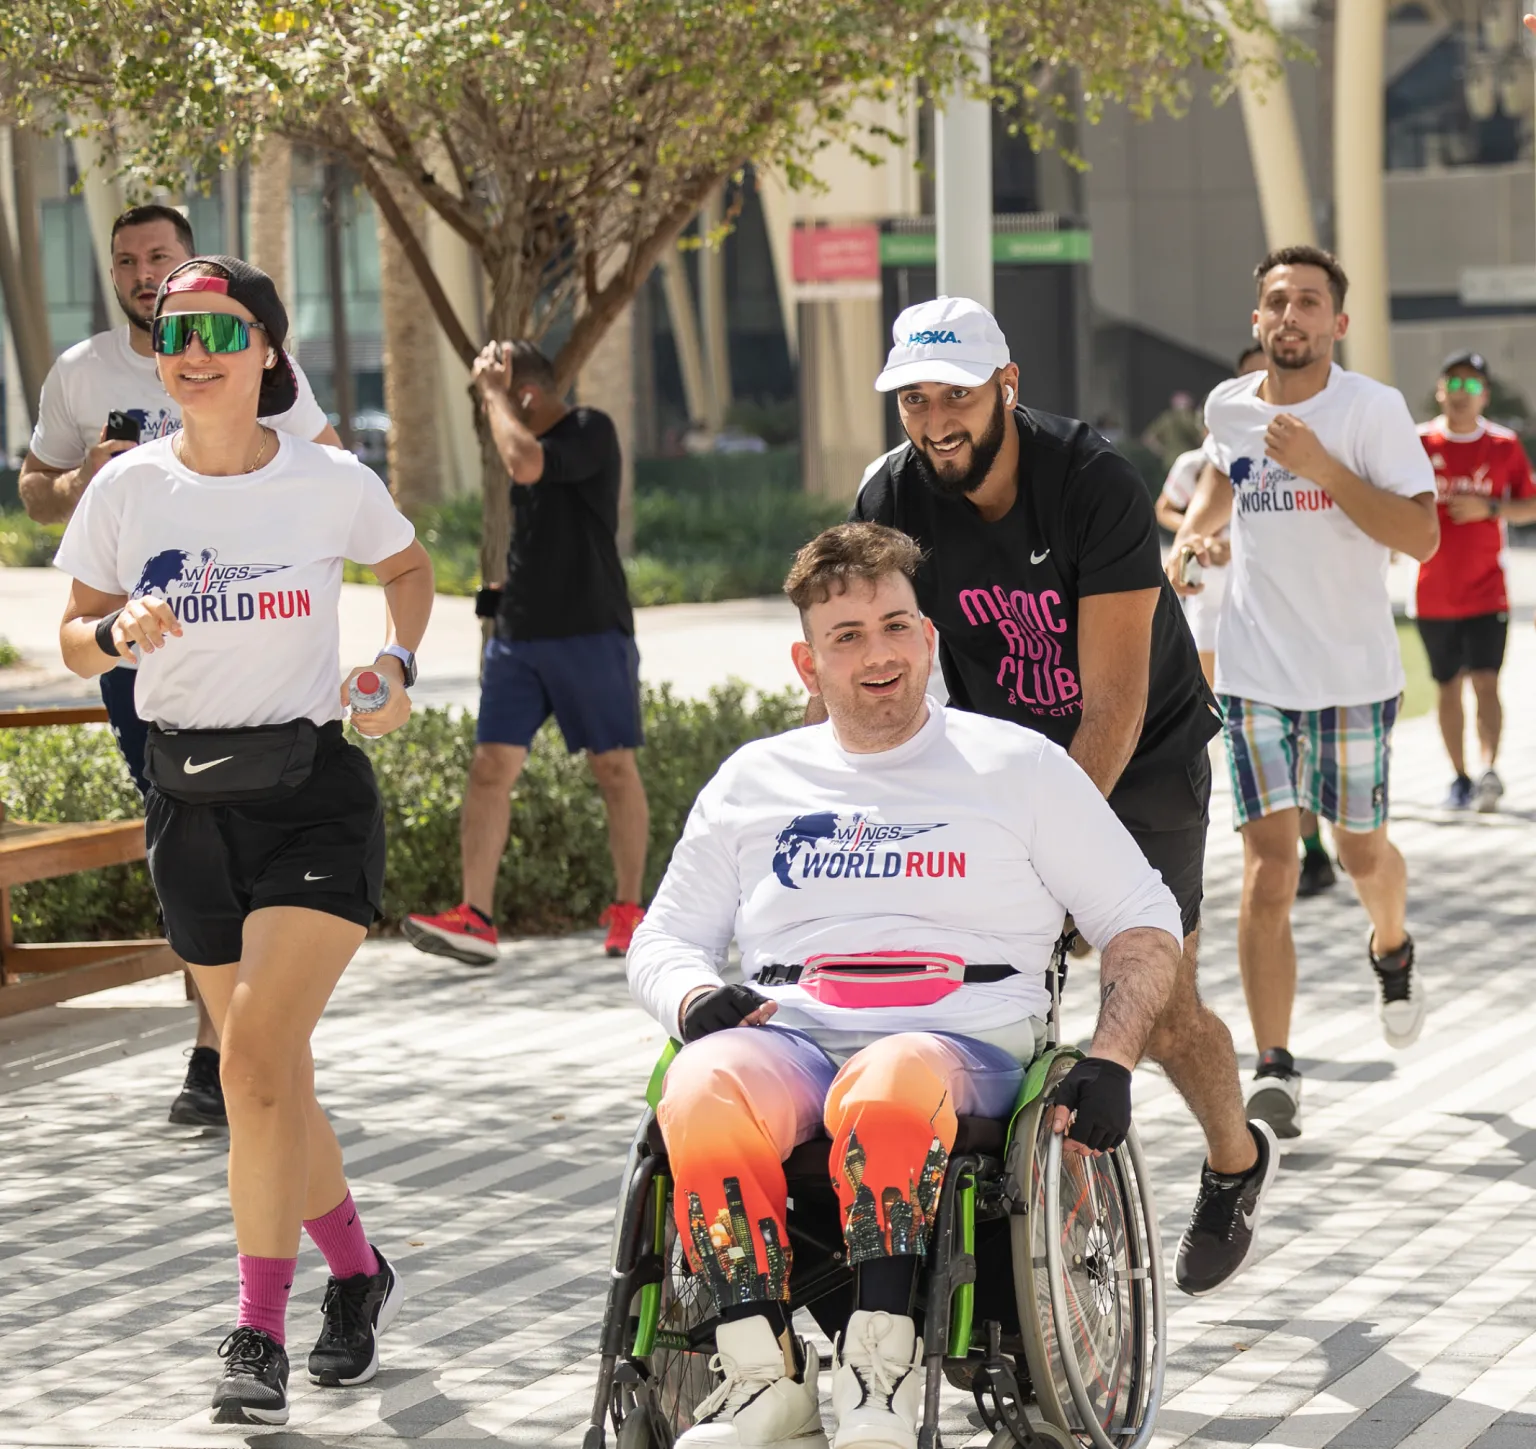 Wings for Life World Run is coming